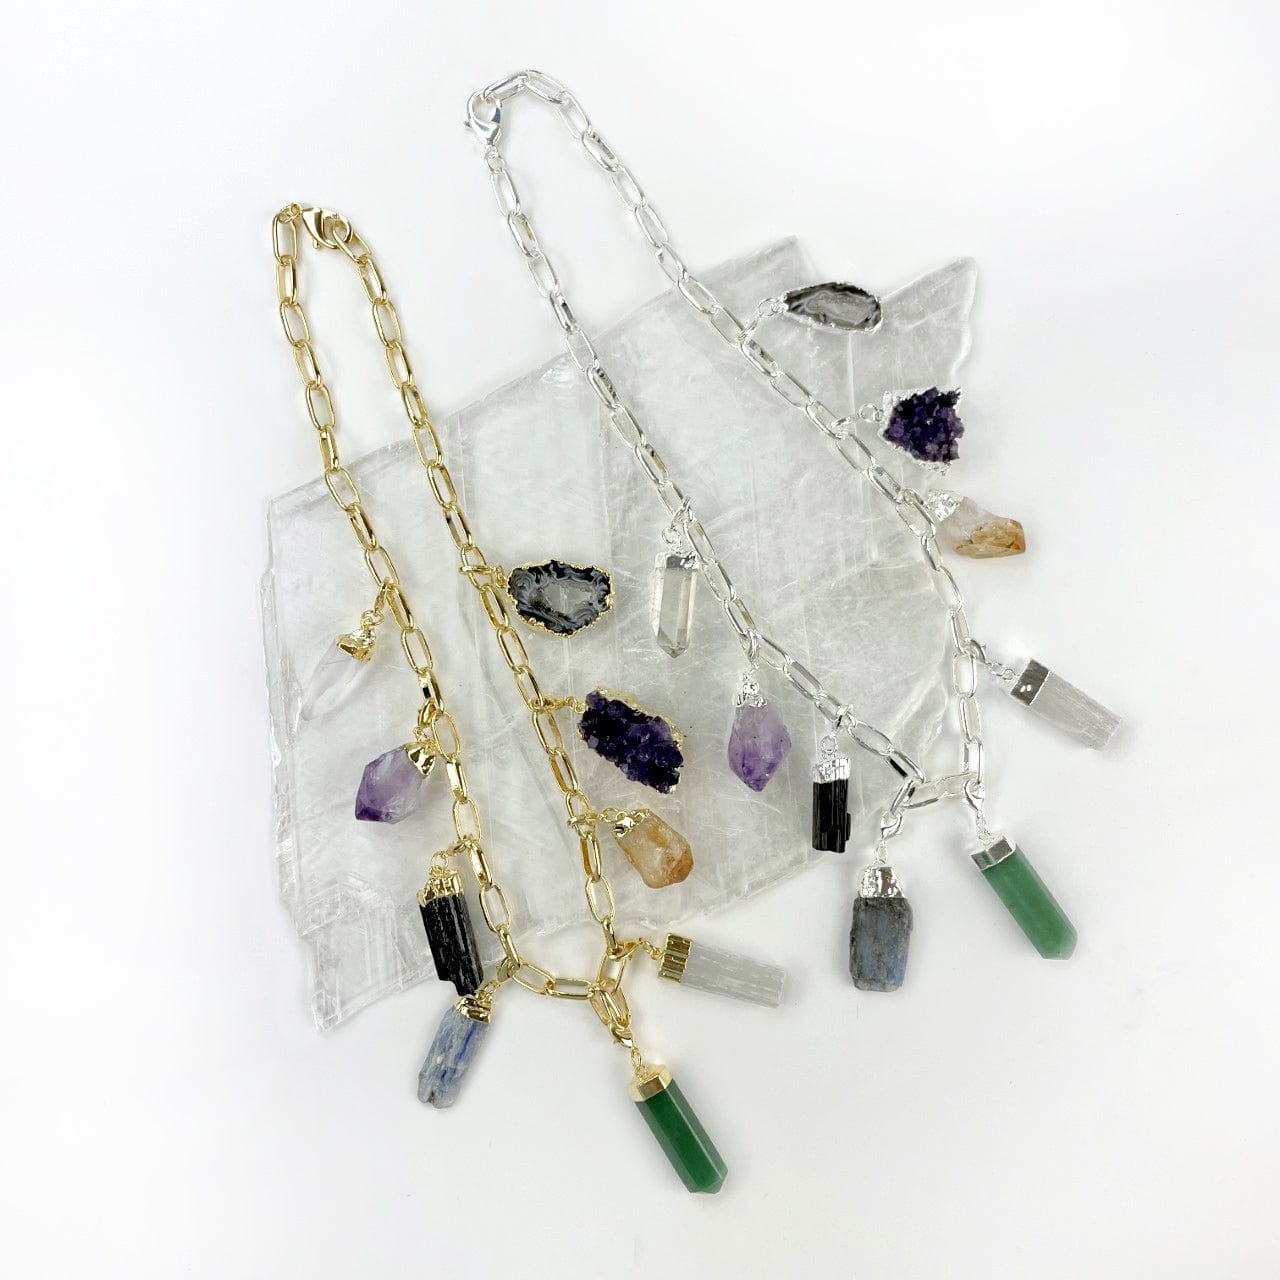 Gemstone and crystal charm necklace in gold and silver laying on a table